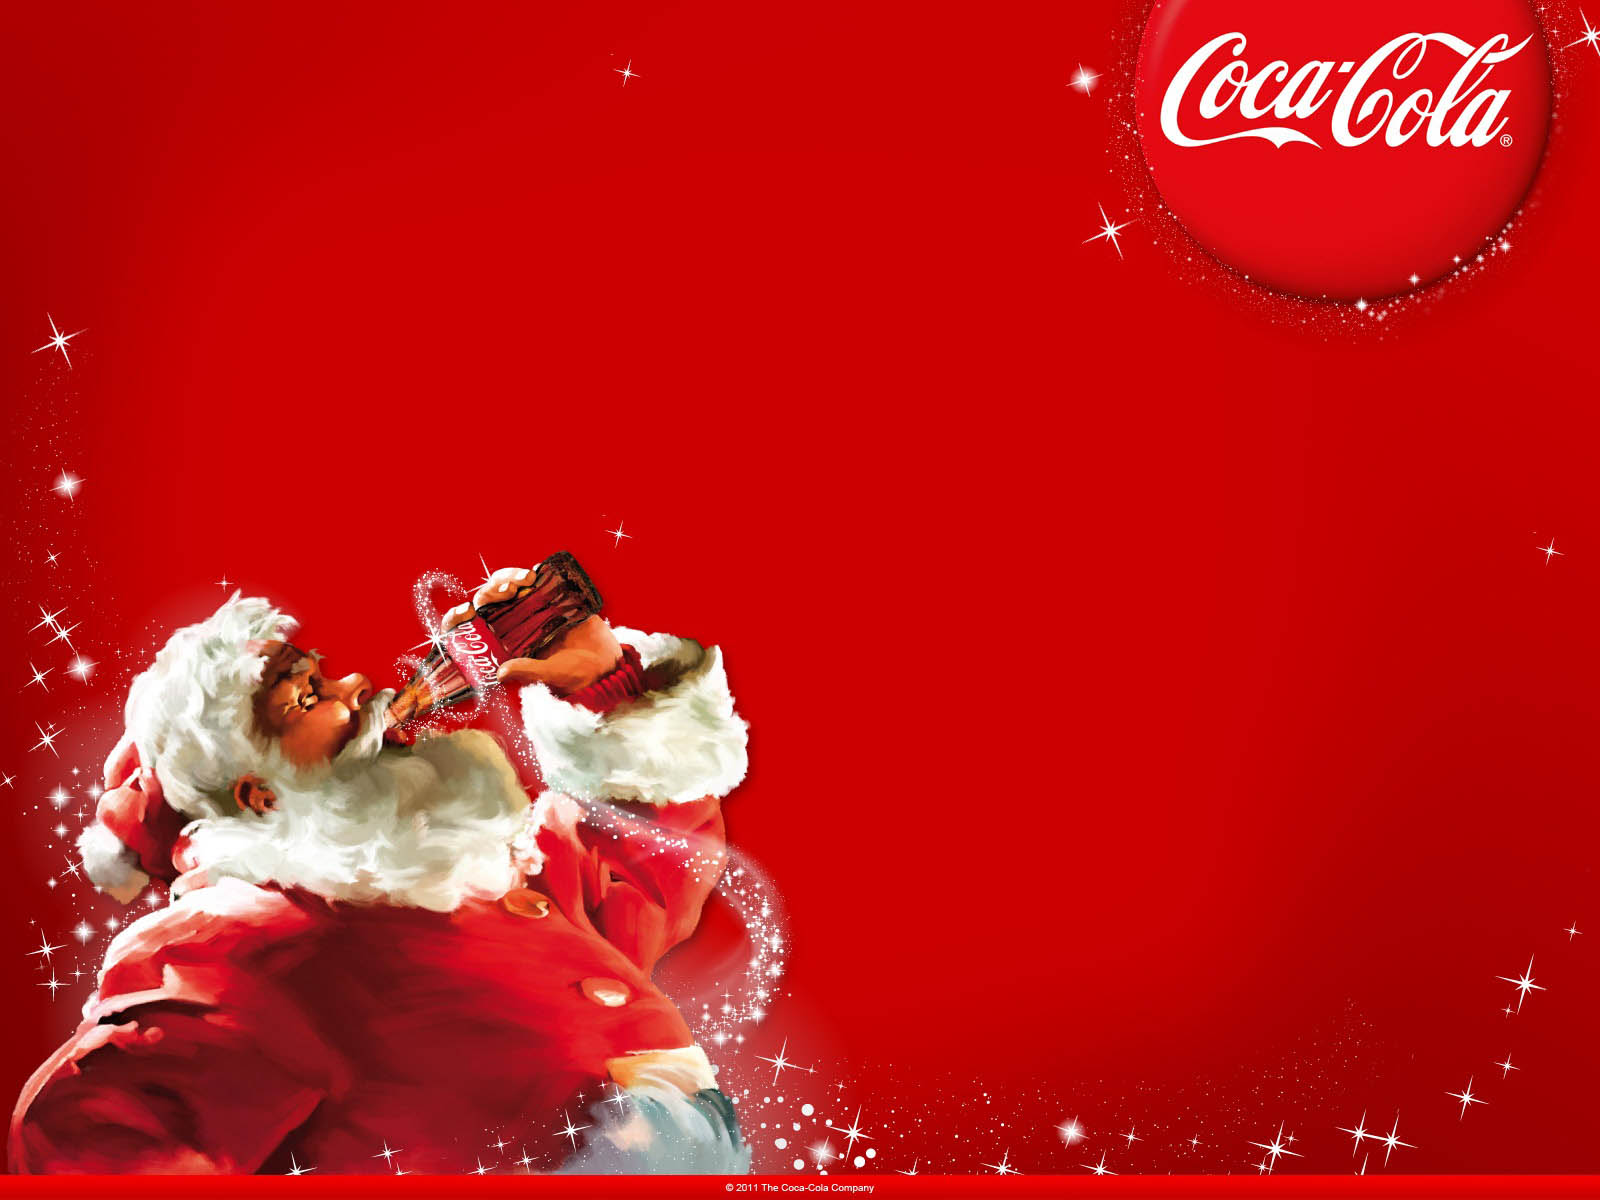 21+] Free Coca Cola Wallpapers on WallpaperSafari Within Coca Cola Powerpoint Template